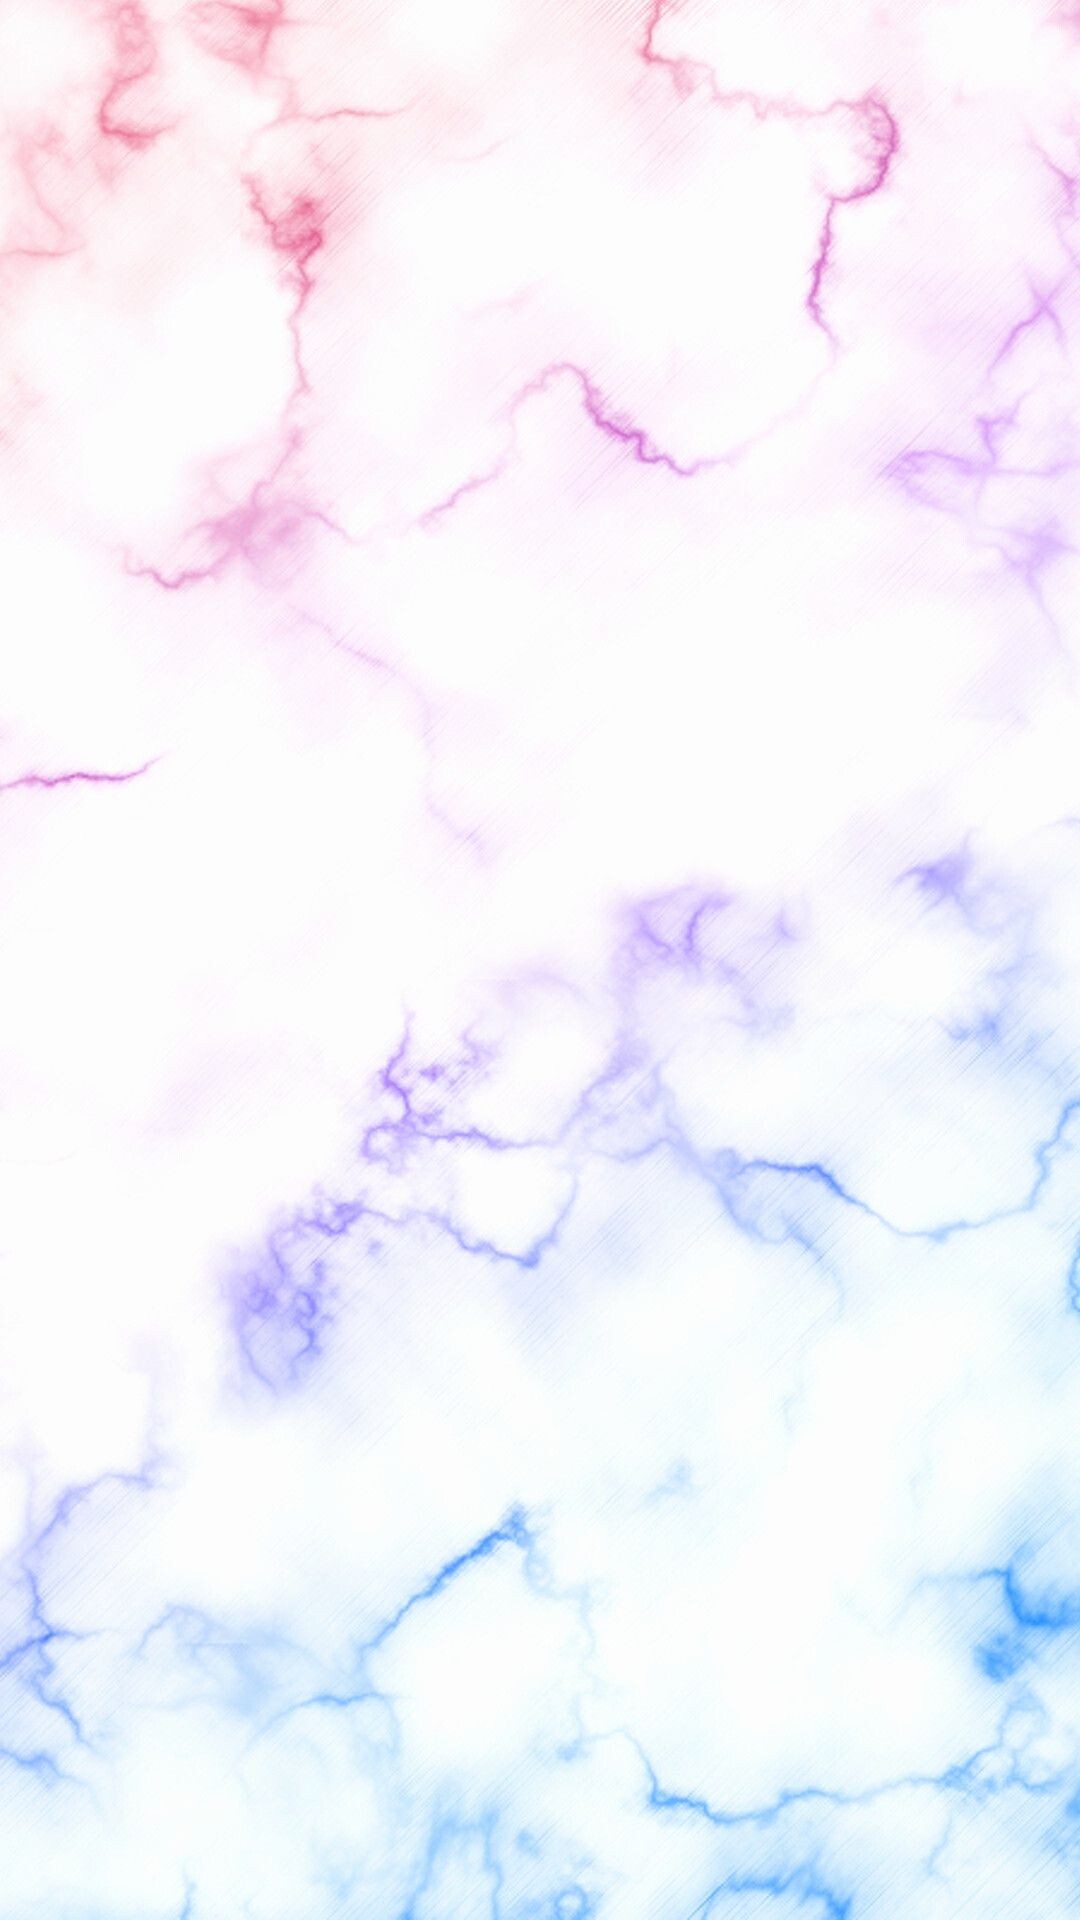 Girly: Atmospheric phenomenon, Bright-colored foam, Blue and pink. 1080x1920 Full HD Background.